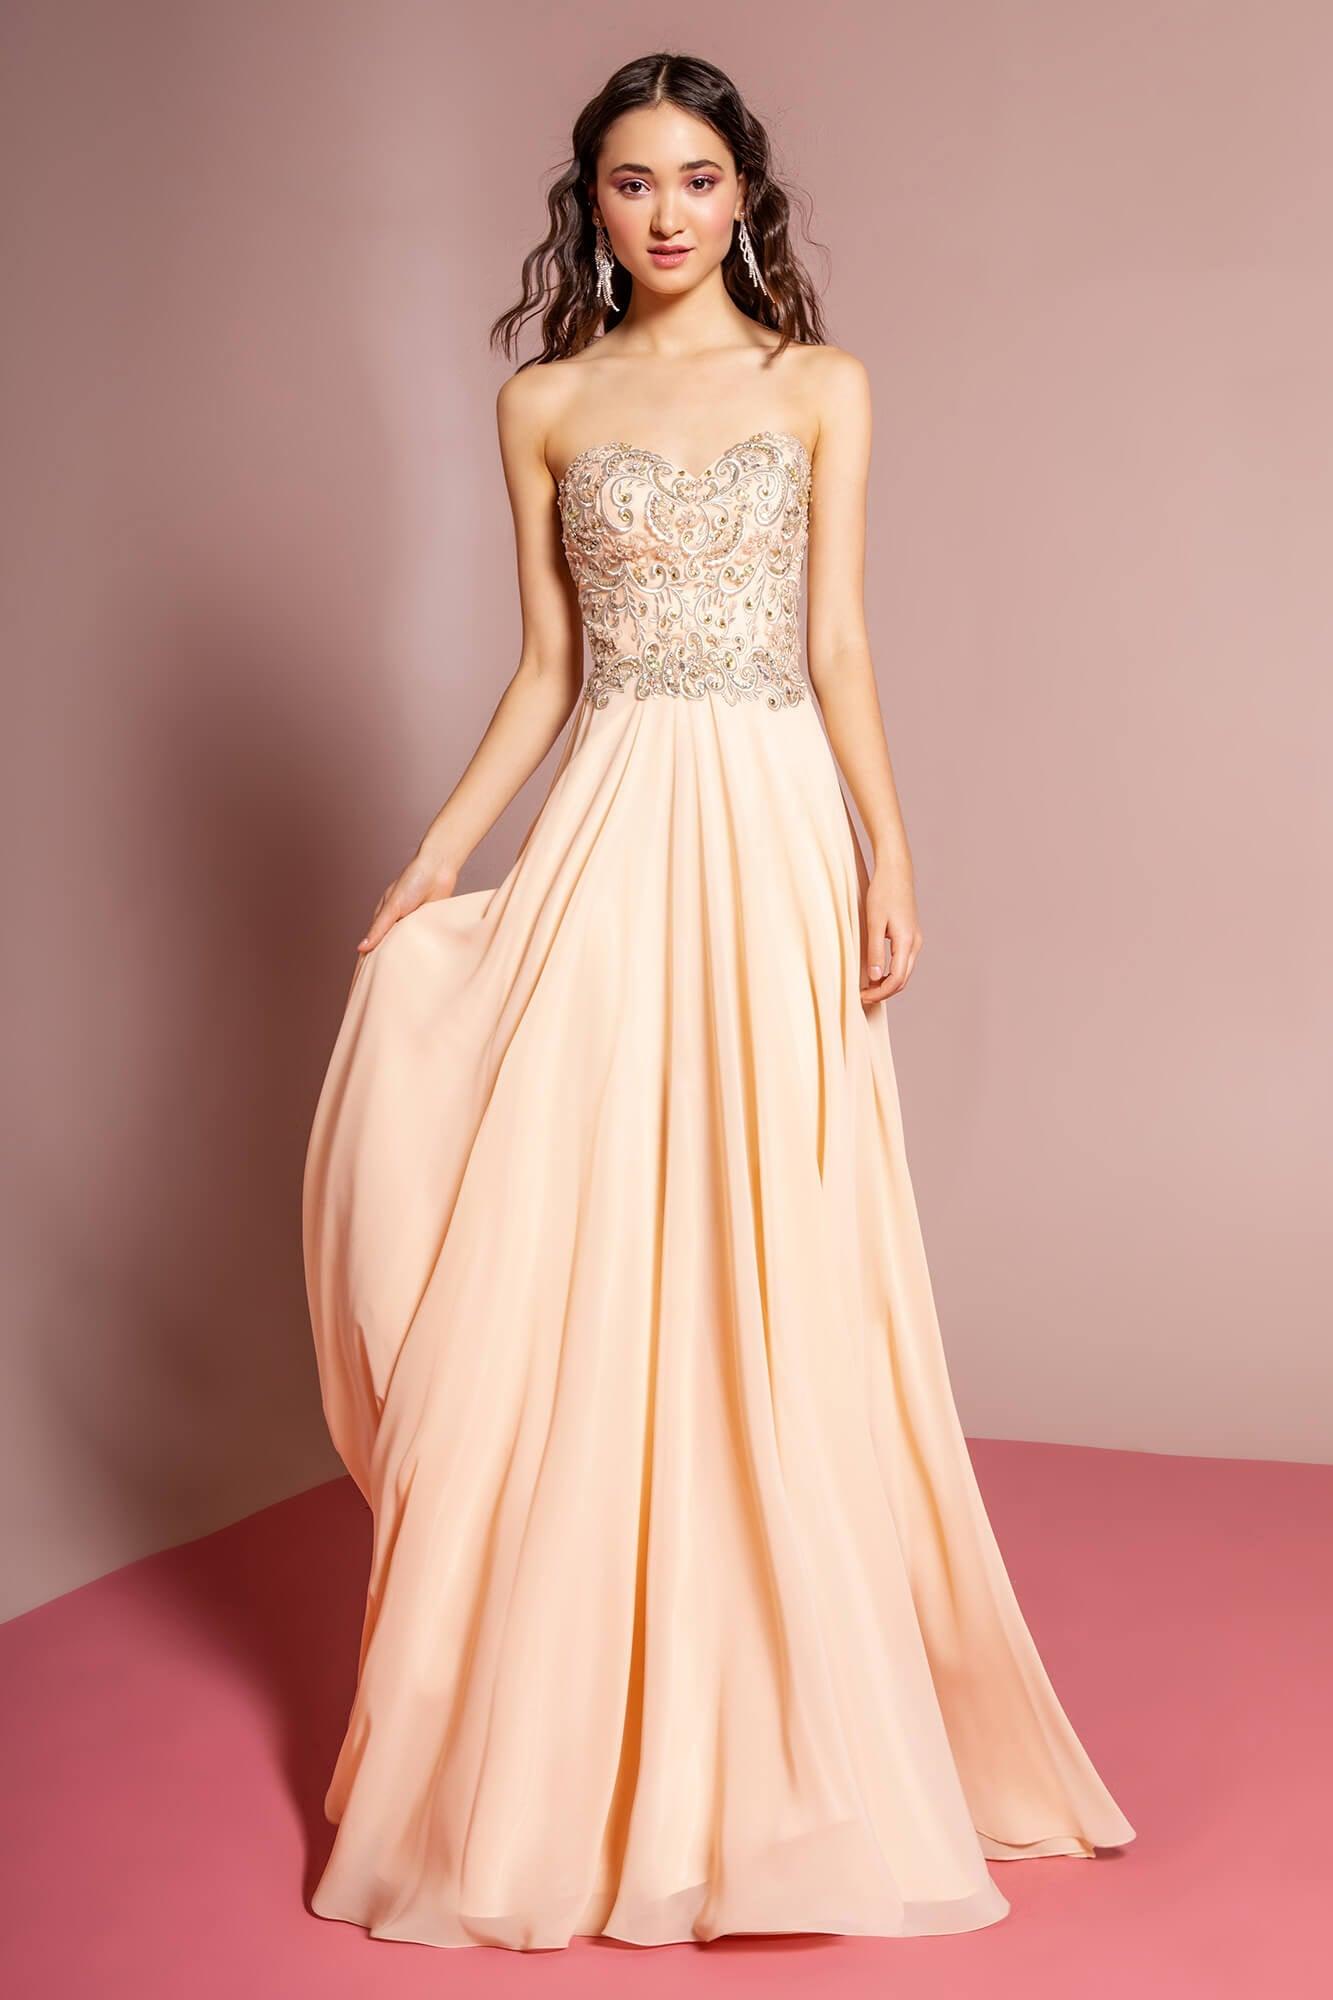 Prom Strapless Sweetheart Chiffon Evening Long Gown - The Dress Outlet Elizabeth K